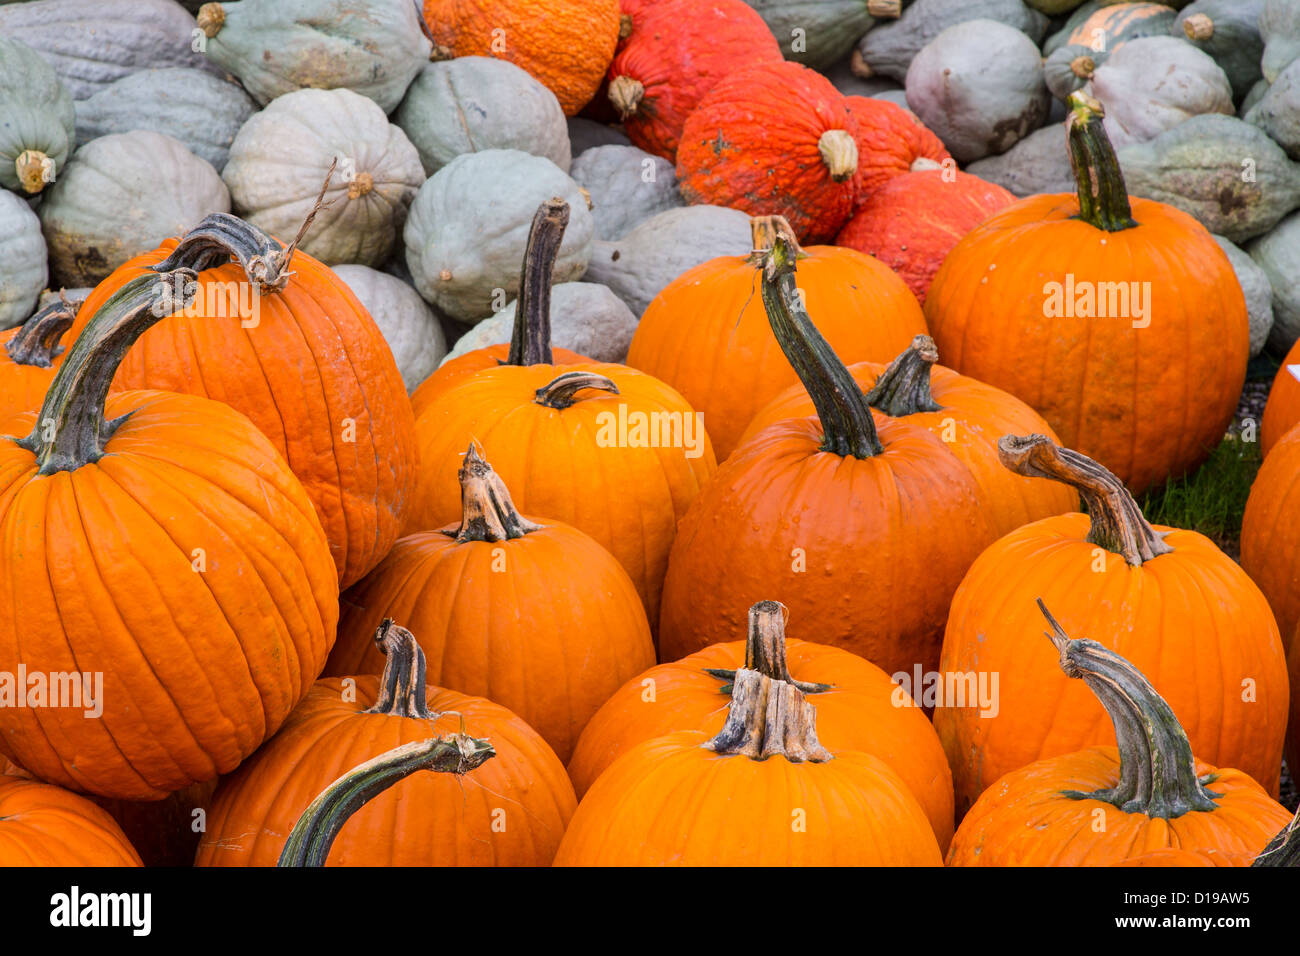 Pumpkins and gourds Stock Photo